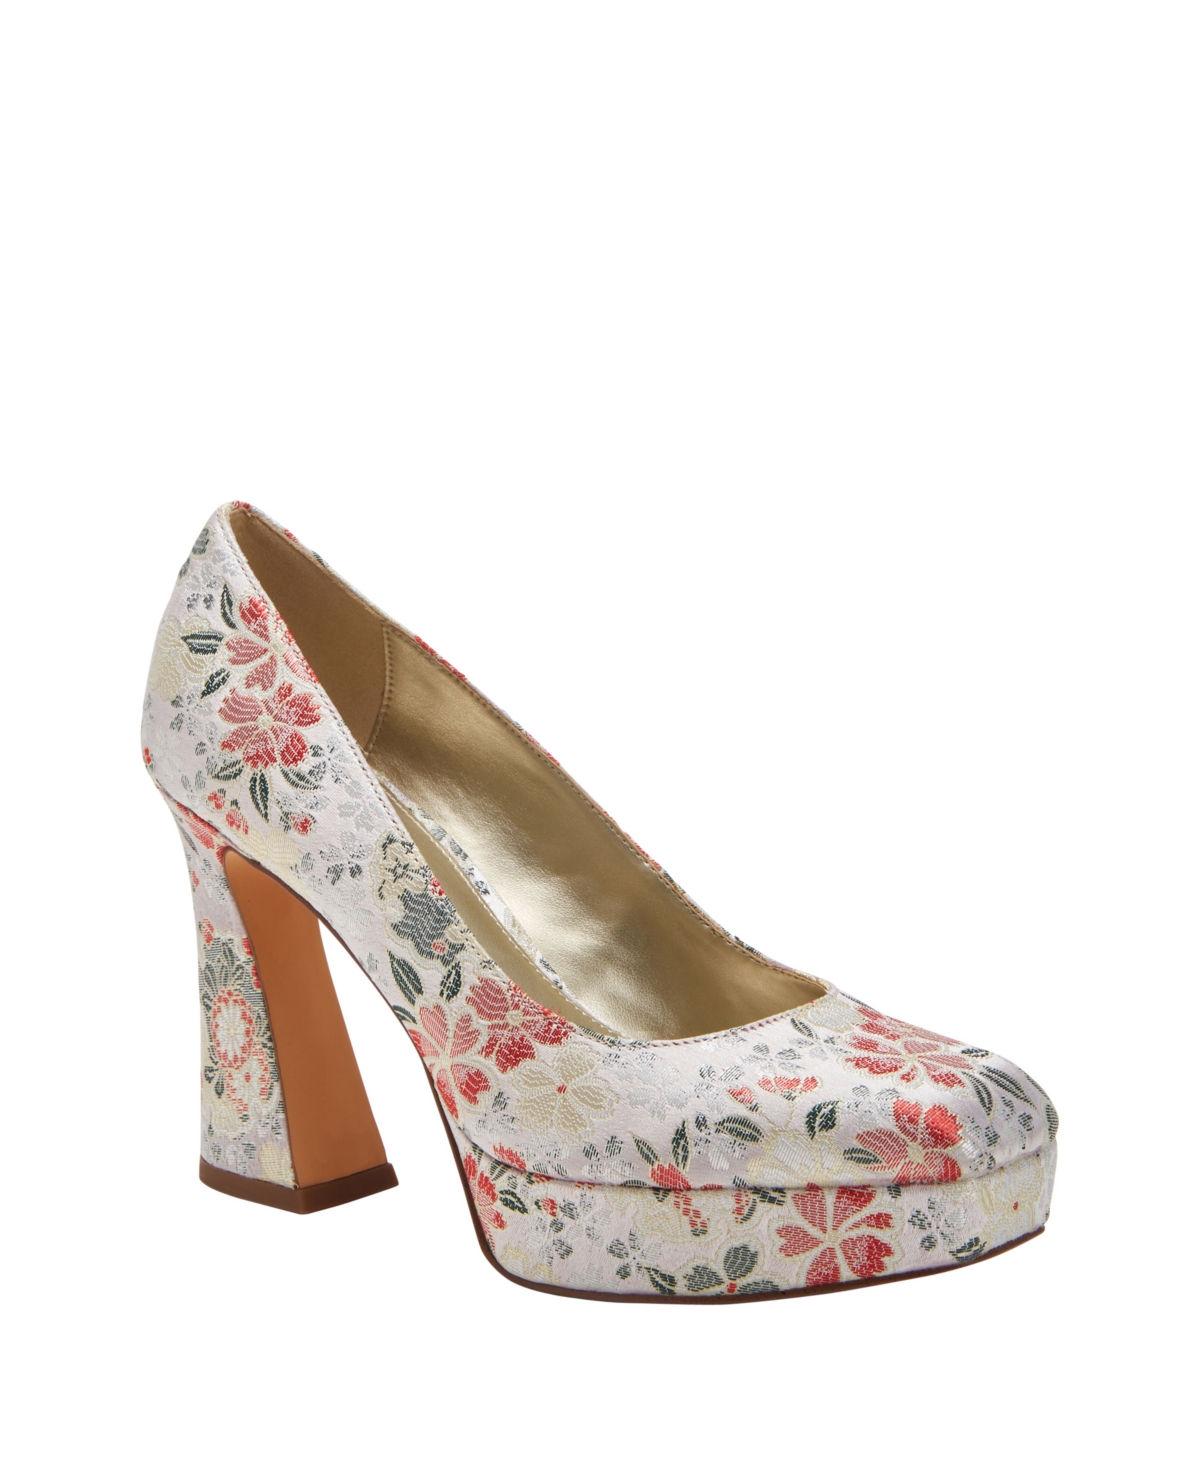 Katy Perry Women's Square Architectural Heel Pumps In Chalk Multi